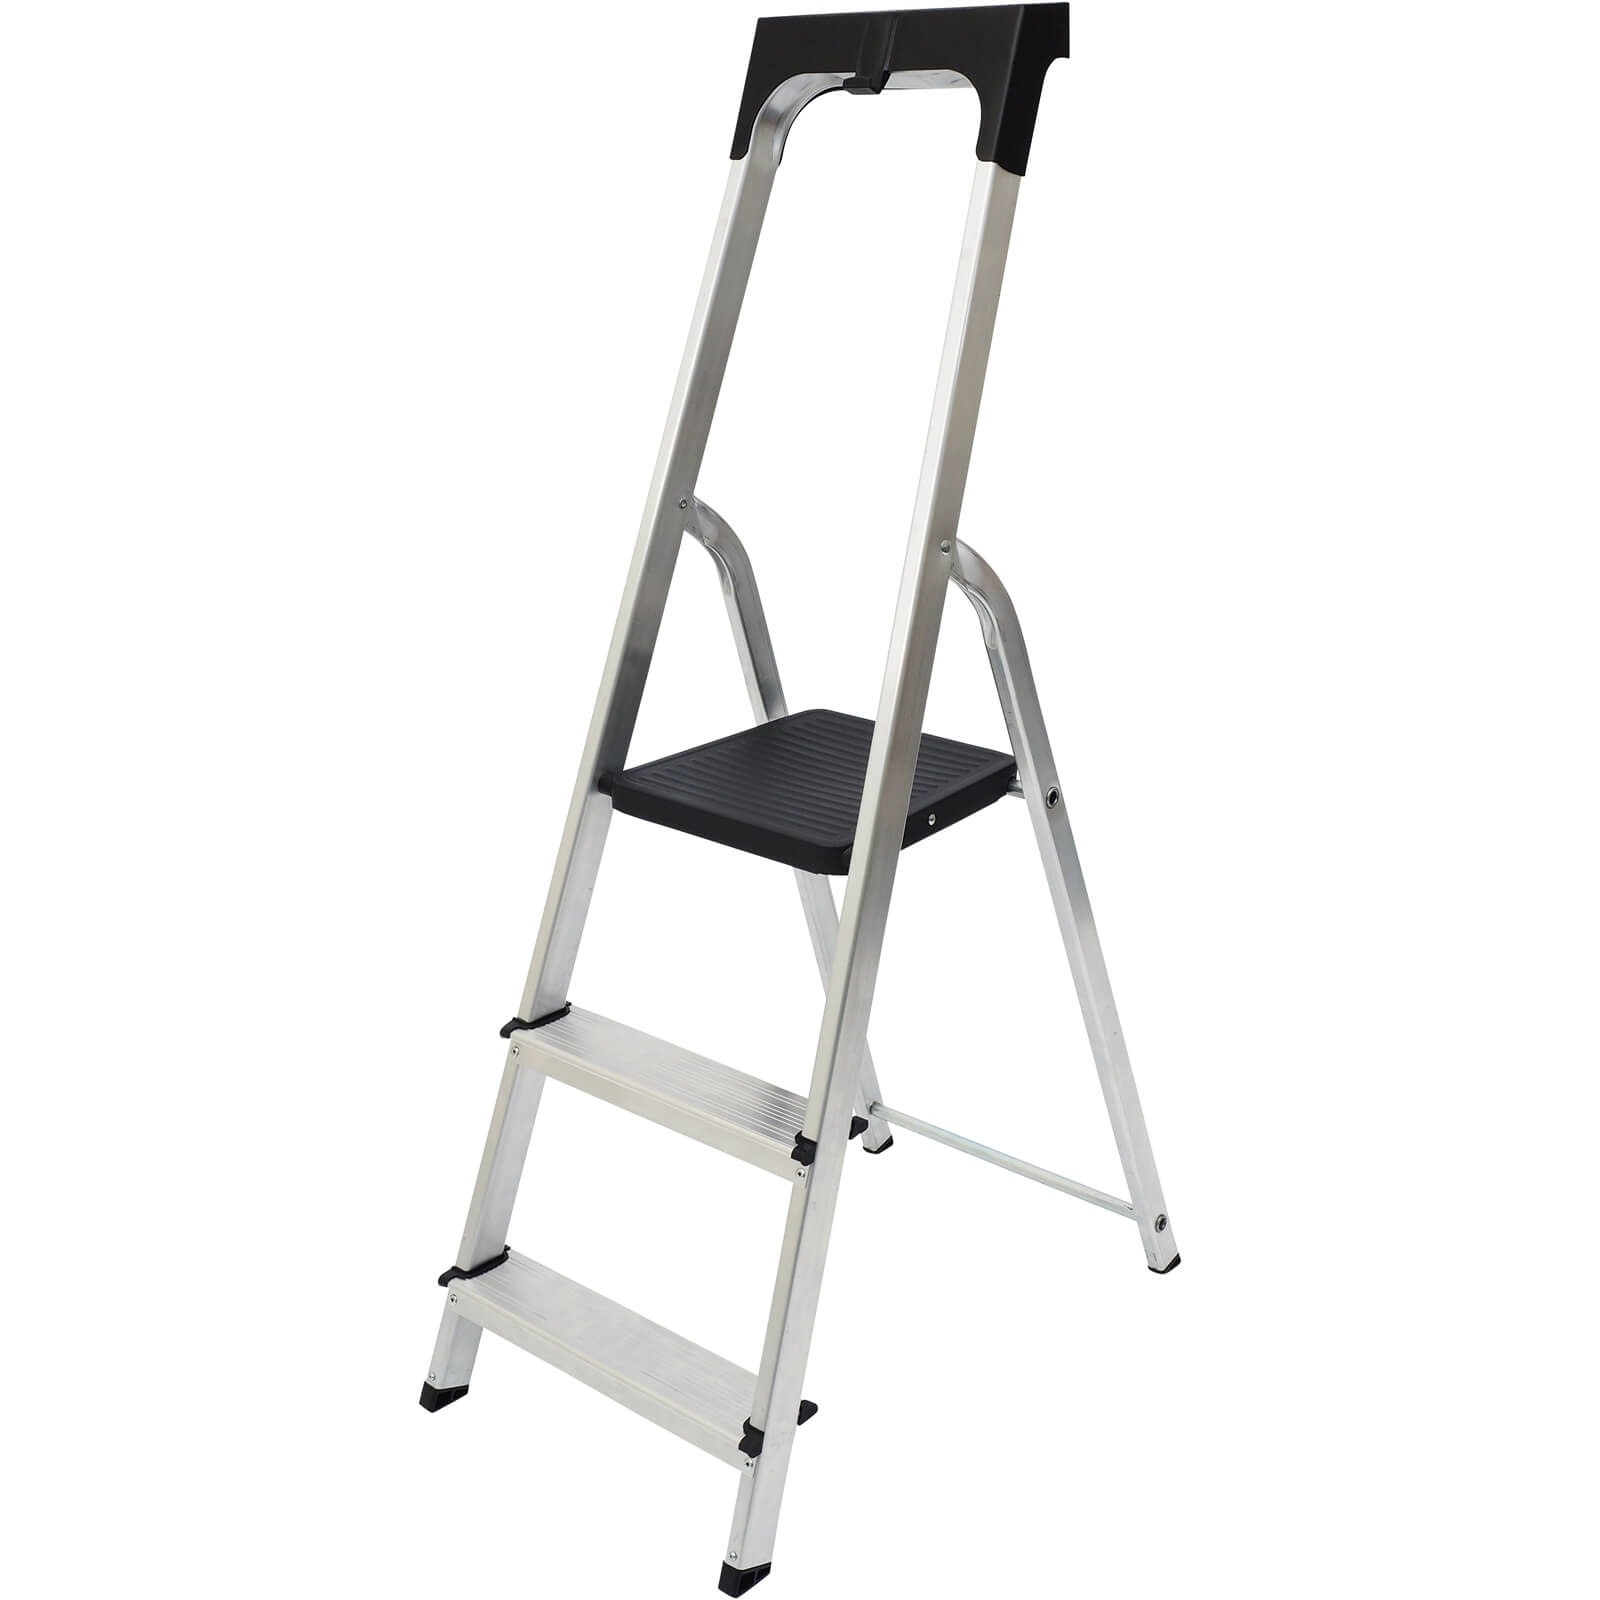 Werner High Handrail Step Ladder with Tool Tray - 3 Tread